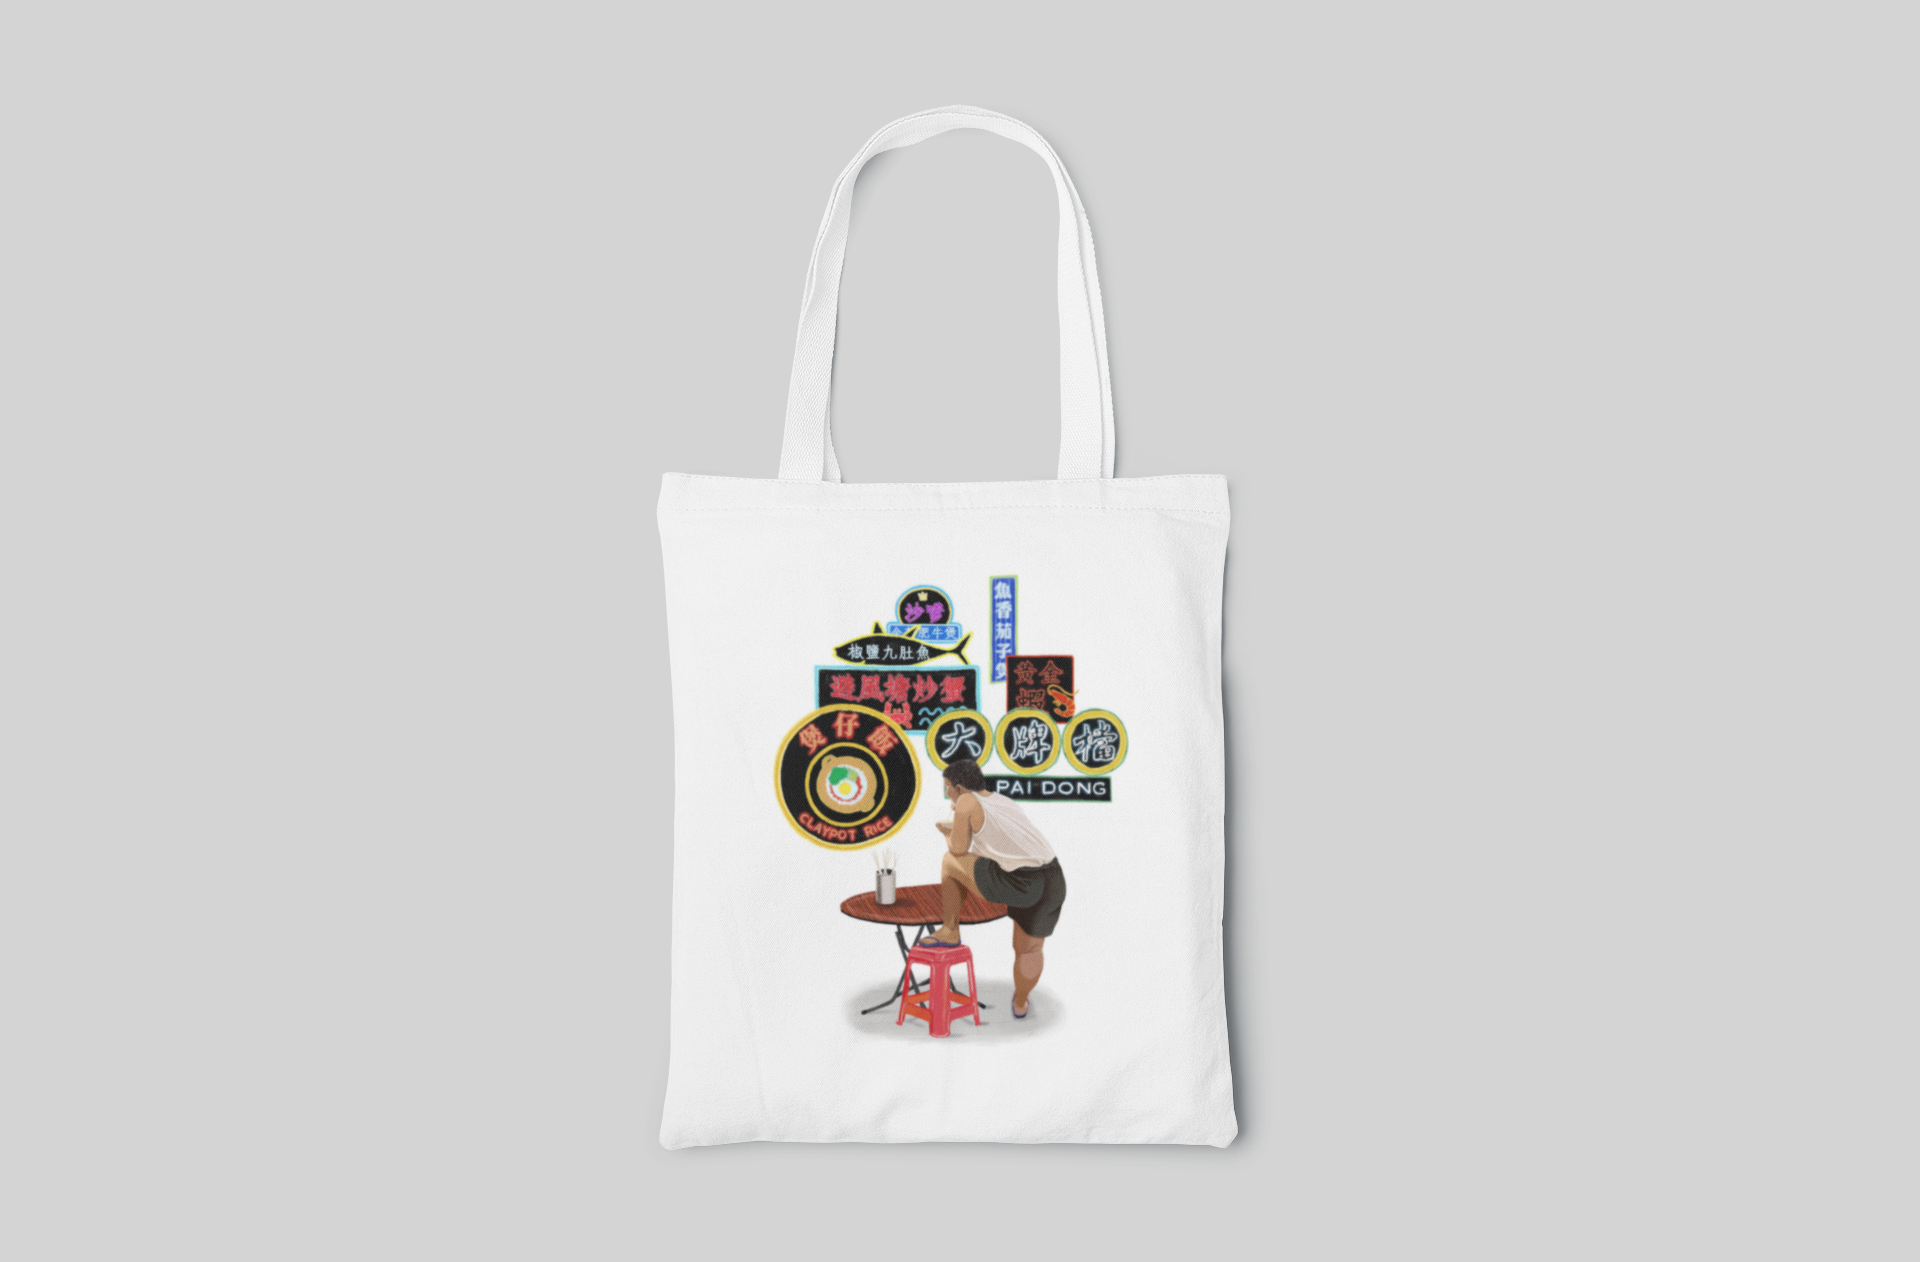 White tote bag with illustration of guy sitting at red table and HK neon lights